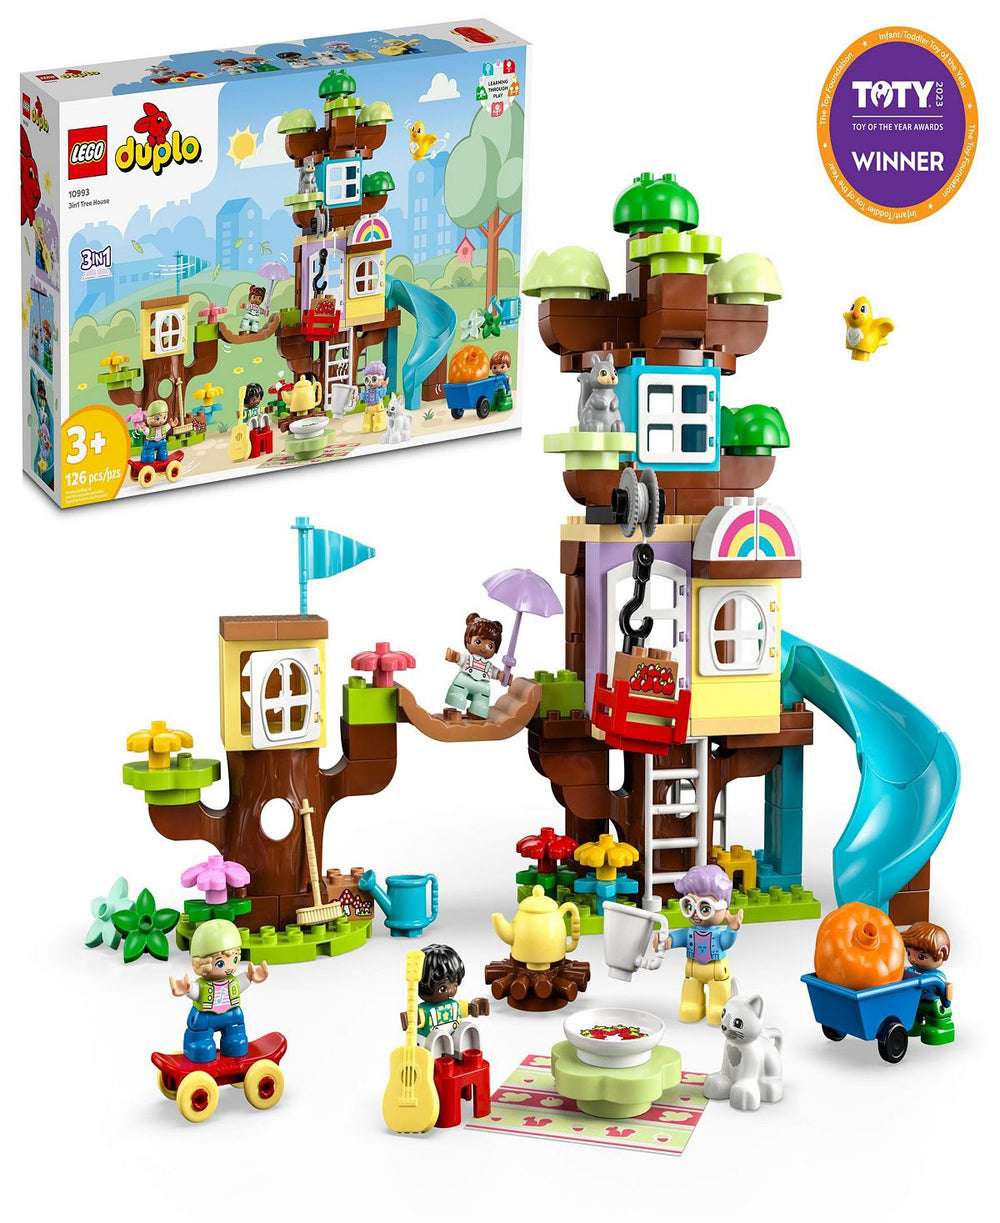 LEGO DUPLO Town 3in1 Tree House 10993 - Creative Building Set for Toddlers